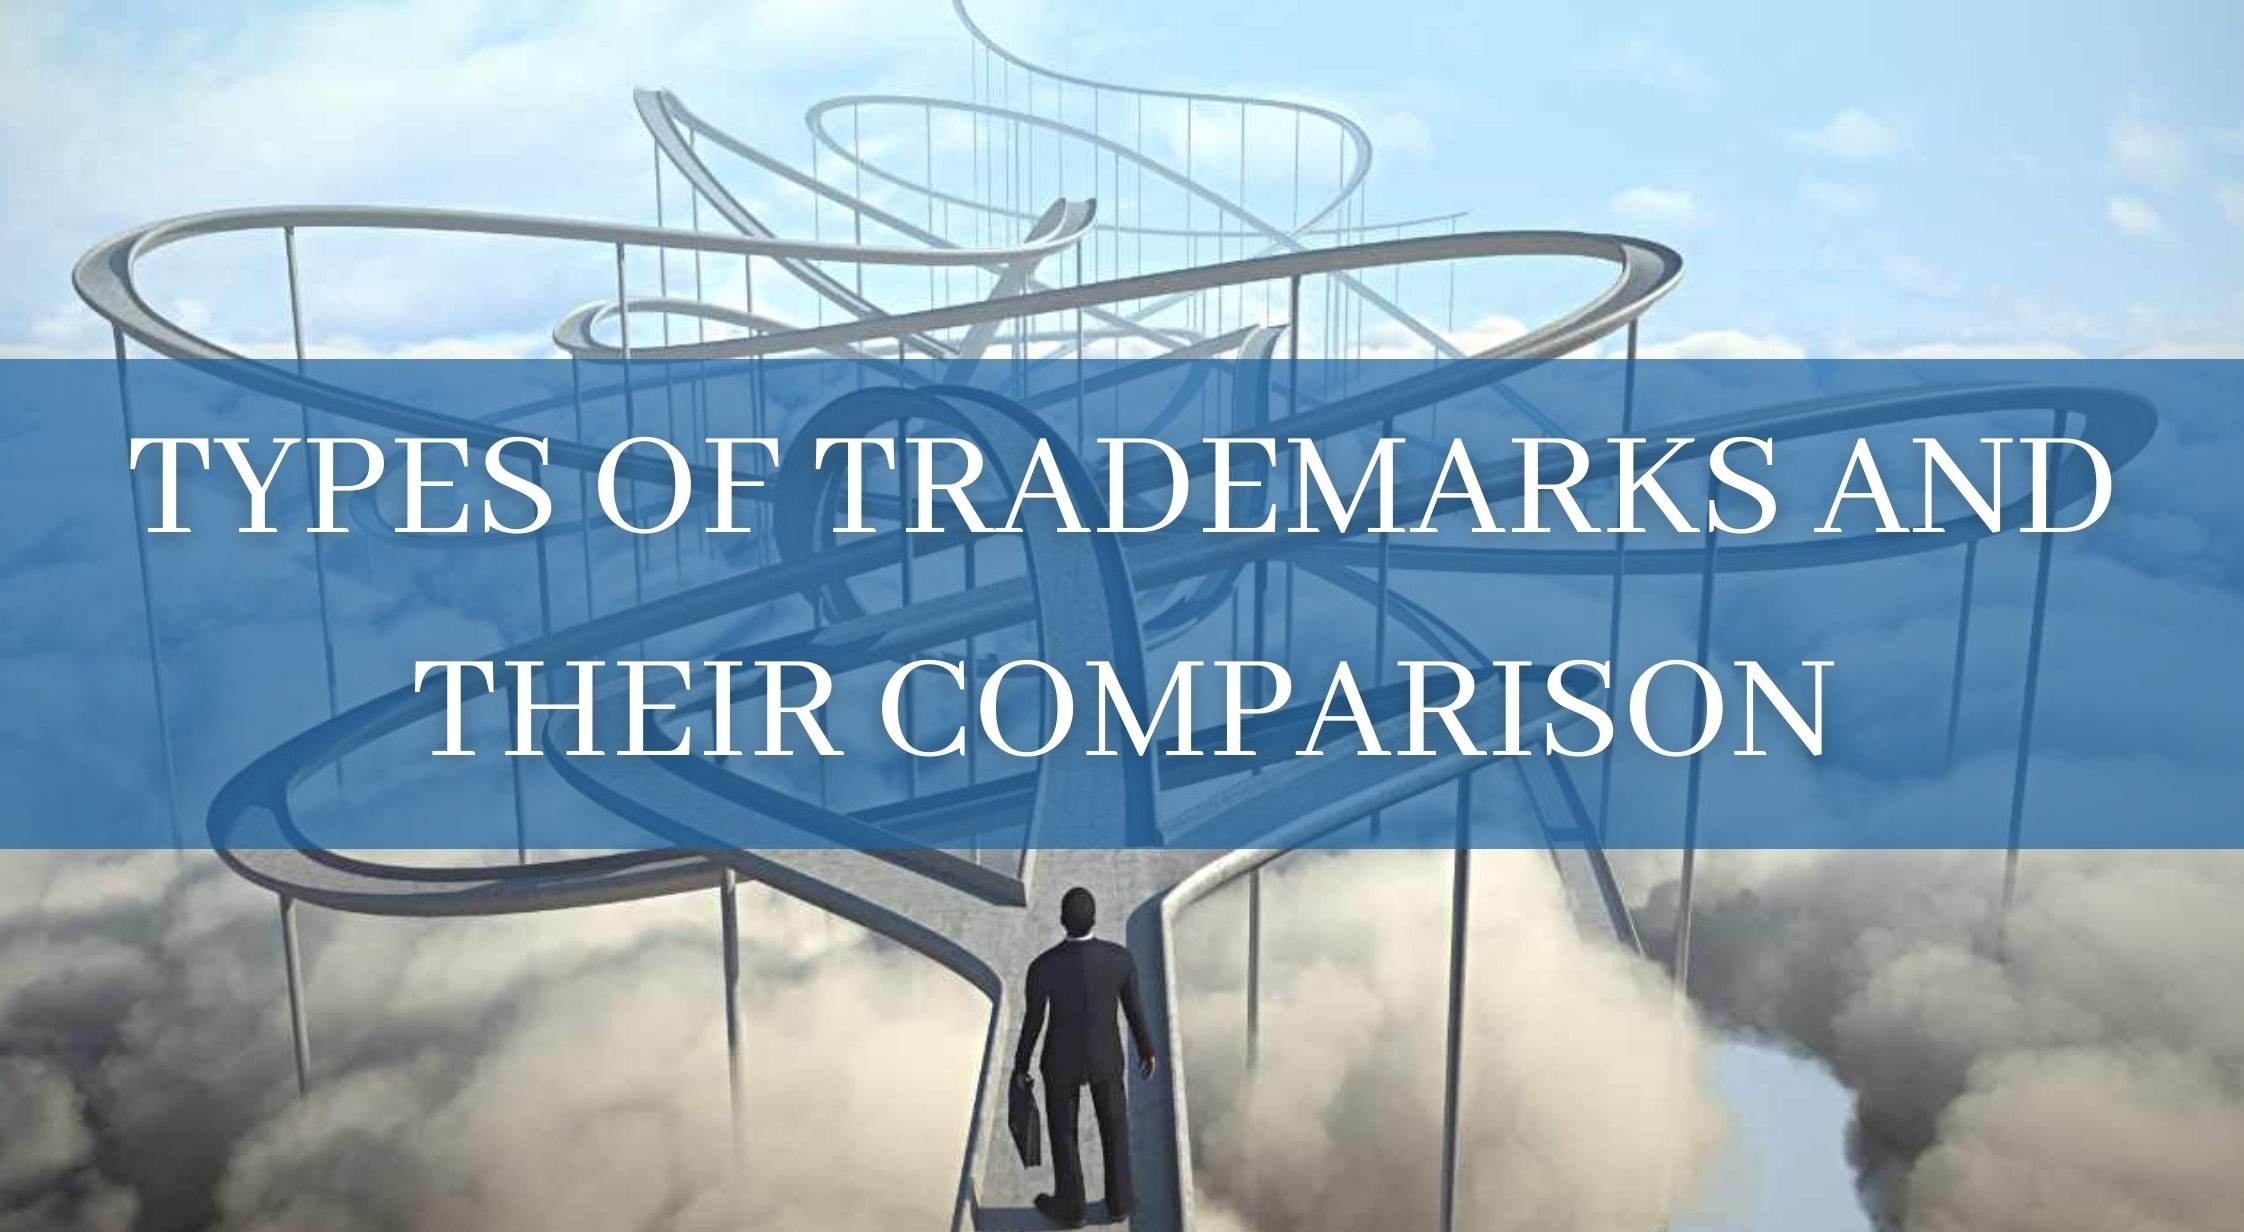 TYPES OF TRADEMARKS AND THEIR COMPARISON